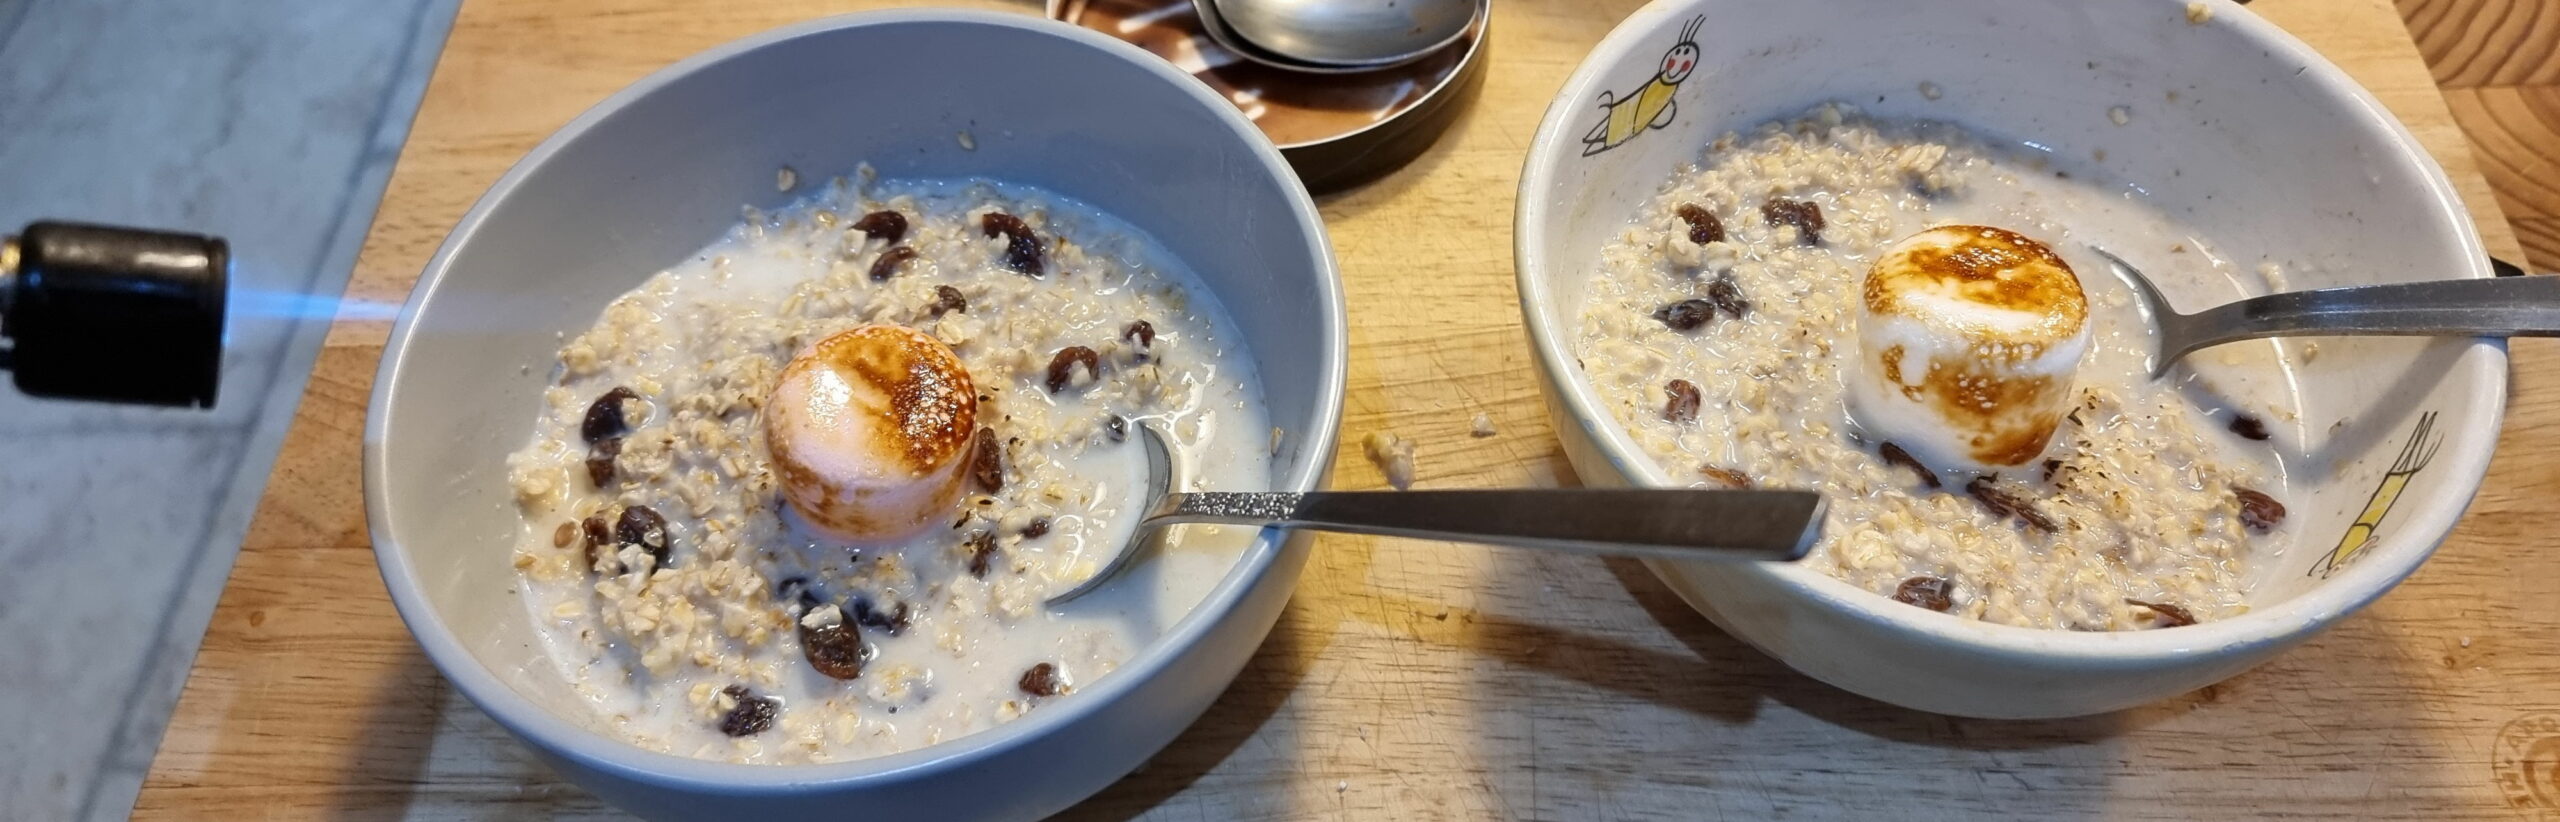 Two bowls of porridge with sultanas, each topped with a jumbo marshmallow (one pink, one white) being toasted by a blowtorch (mostly off-camera).